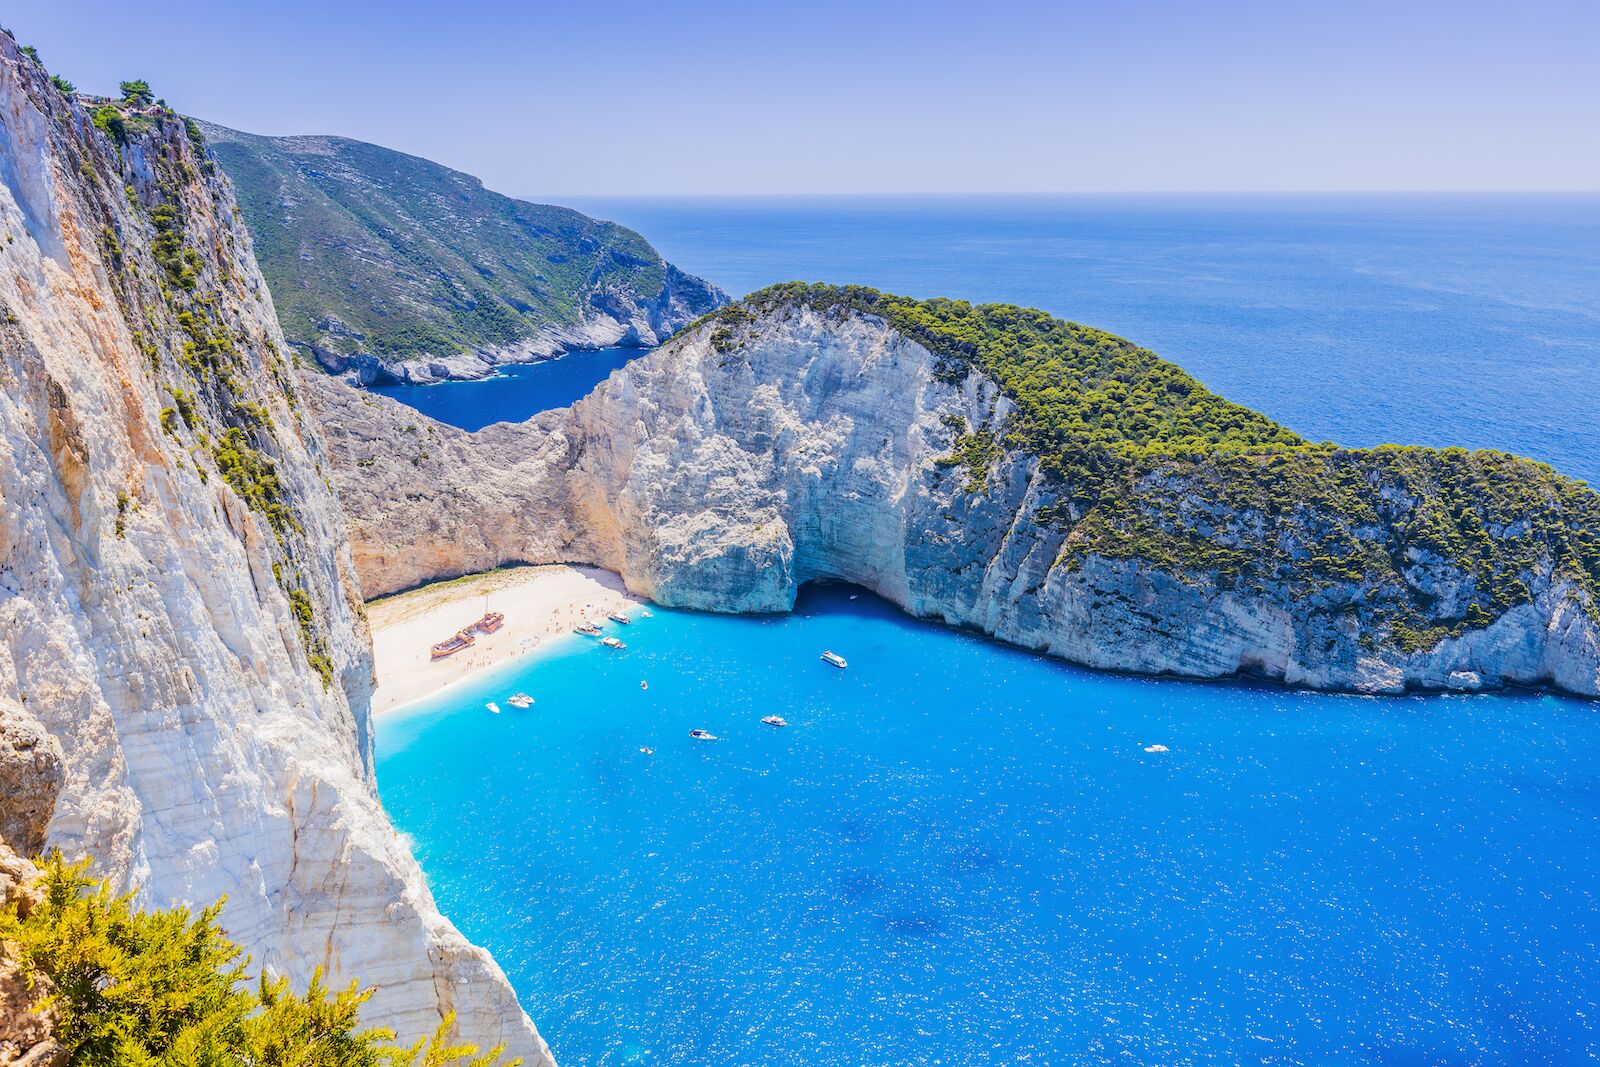 Best time to visit Greece: View of the famous shipwreck beach in Zakynthos